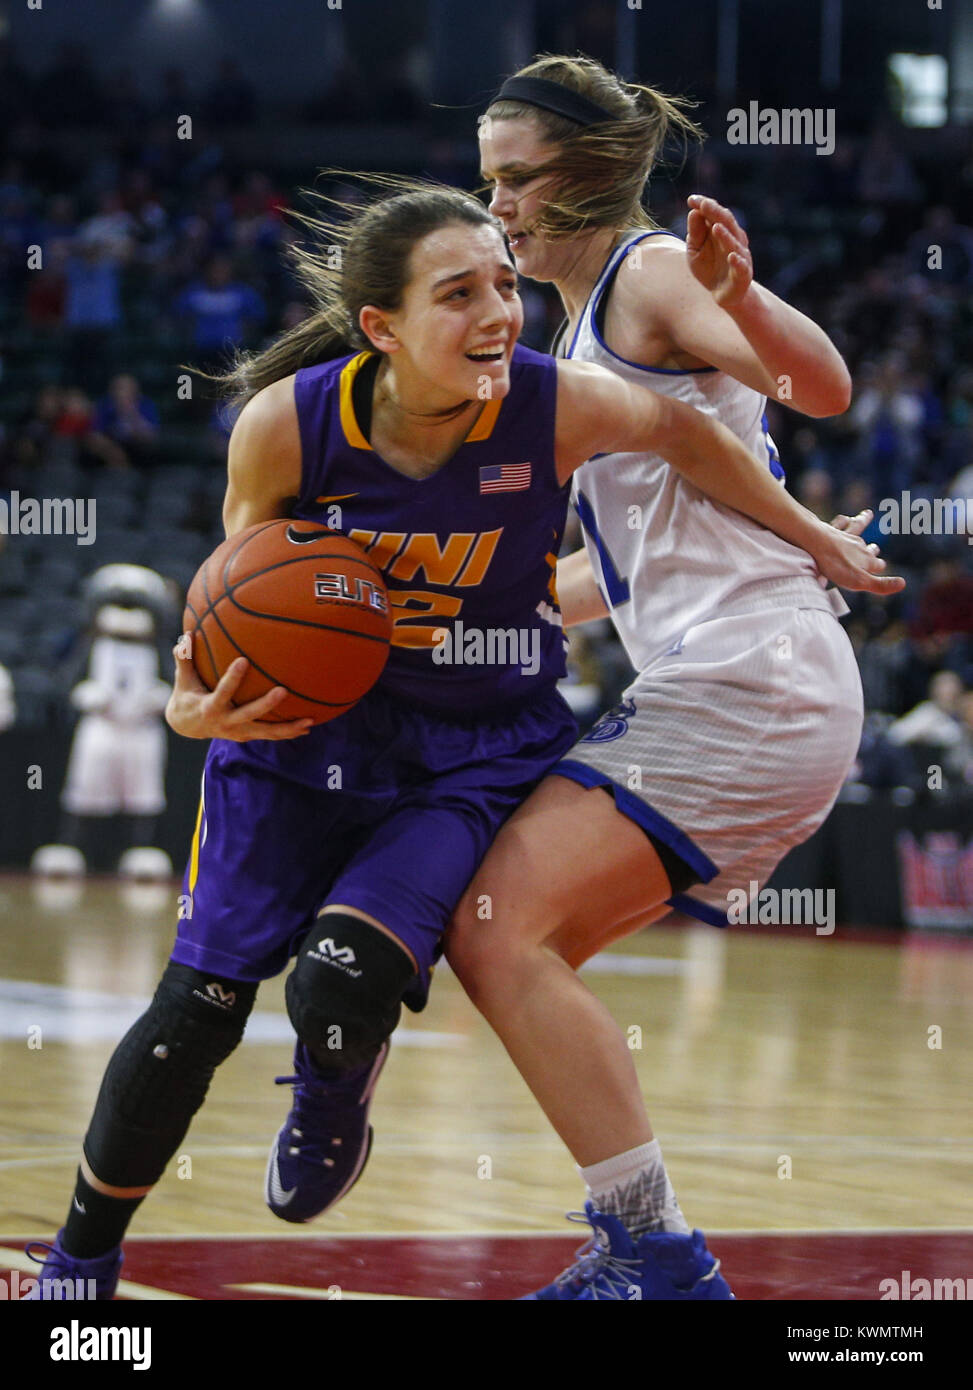 Moline, Iowa, USA. 12th Mar, 2017. Drake's Sammie Bachrodt (21) guards Northern Iowa's Madison Weekly (2) as she works toward the hoop during overtime at the iWireless Center in Moline on Sunday, March 12, 2017. After trailing much of the game, Drake rallied to beat Northern Iowa in overtime, 74-69. Credit: Andy Abeyta/Quad-City Times/ZUMA Wire/Alamy Live News Stock Photo